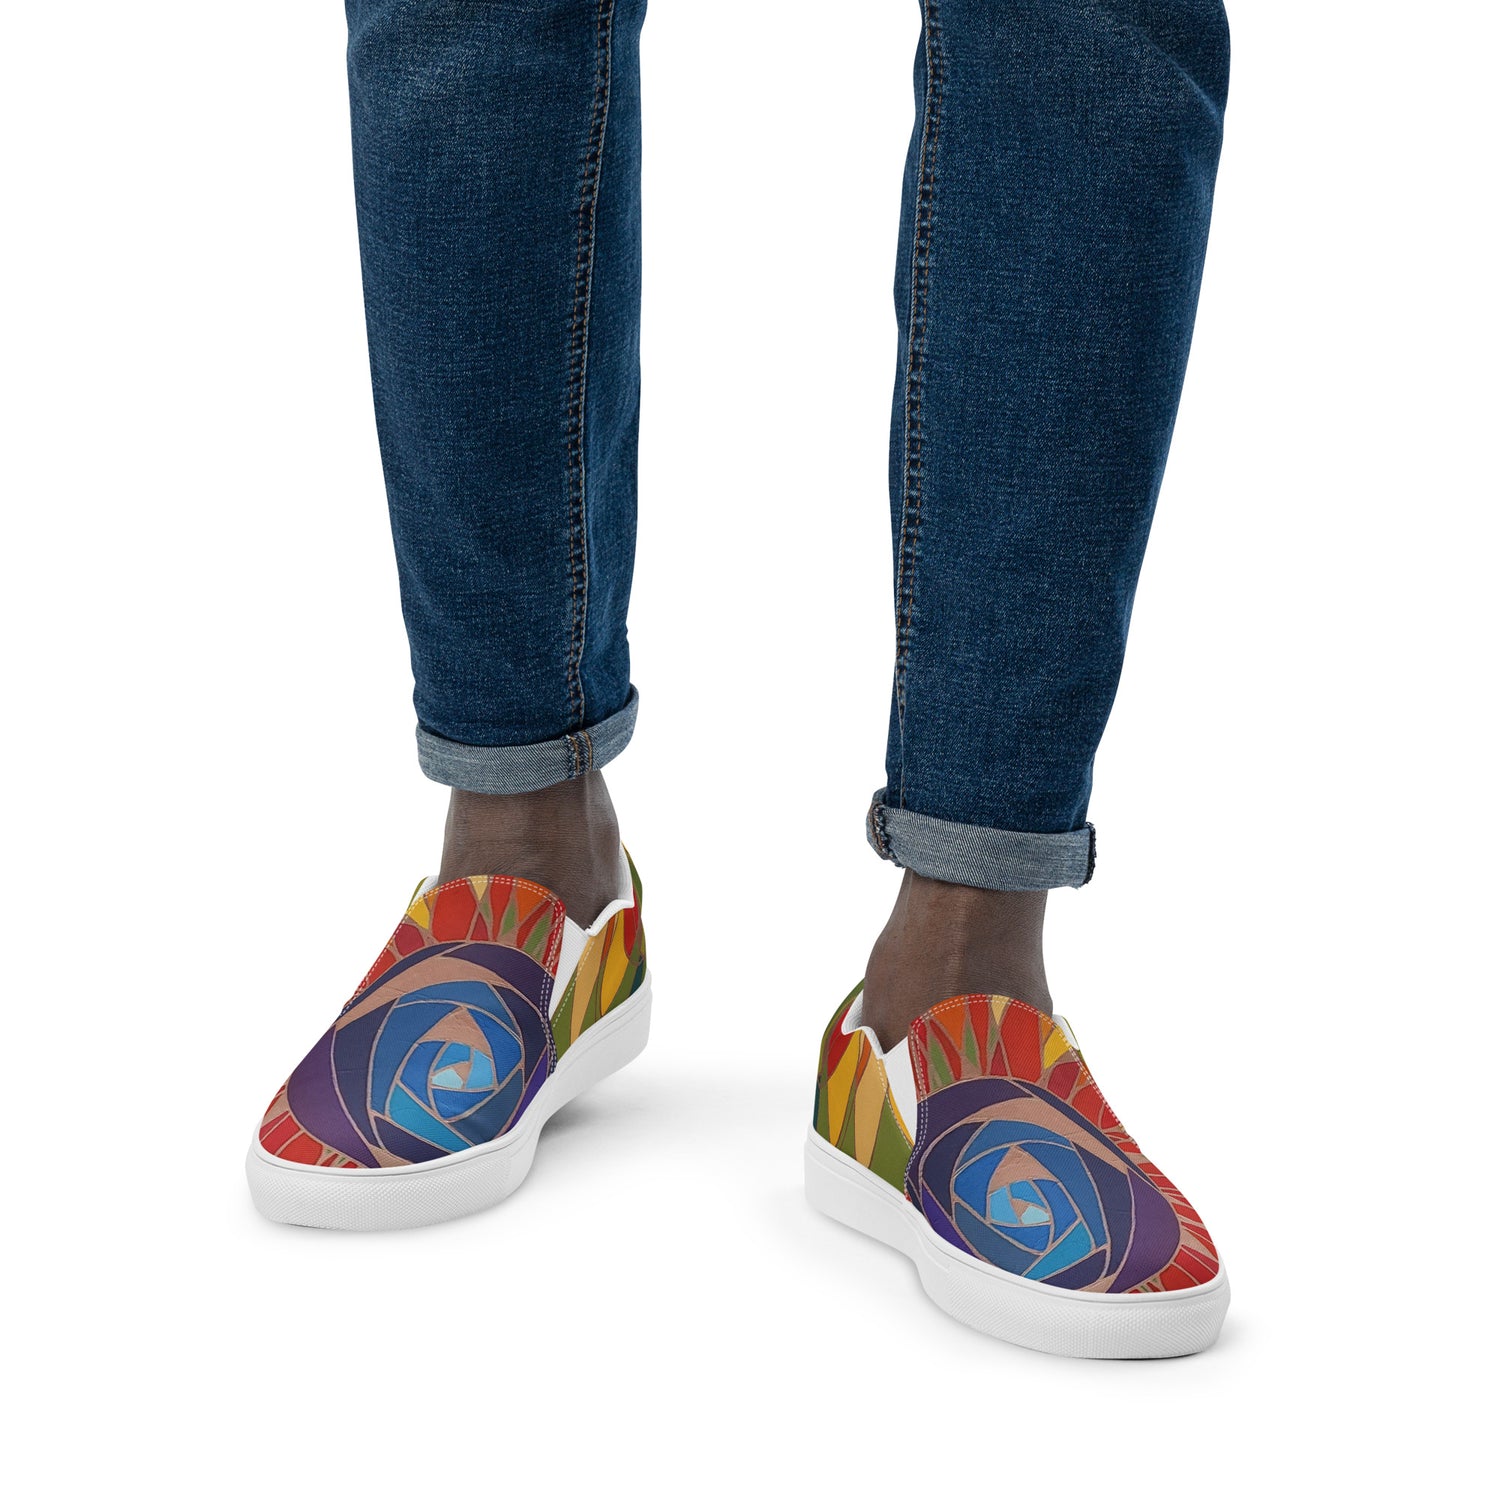 mens slip on canvas shoes with muticolored swirl flower.